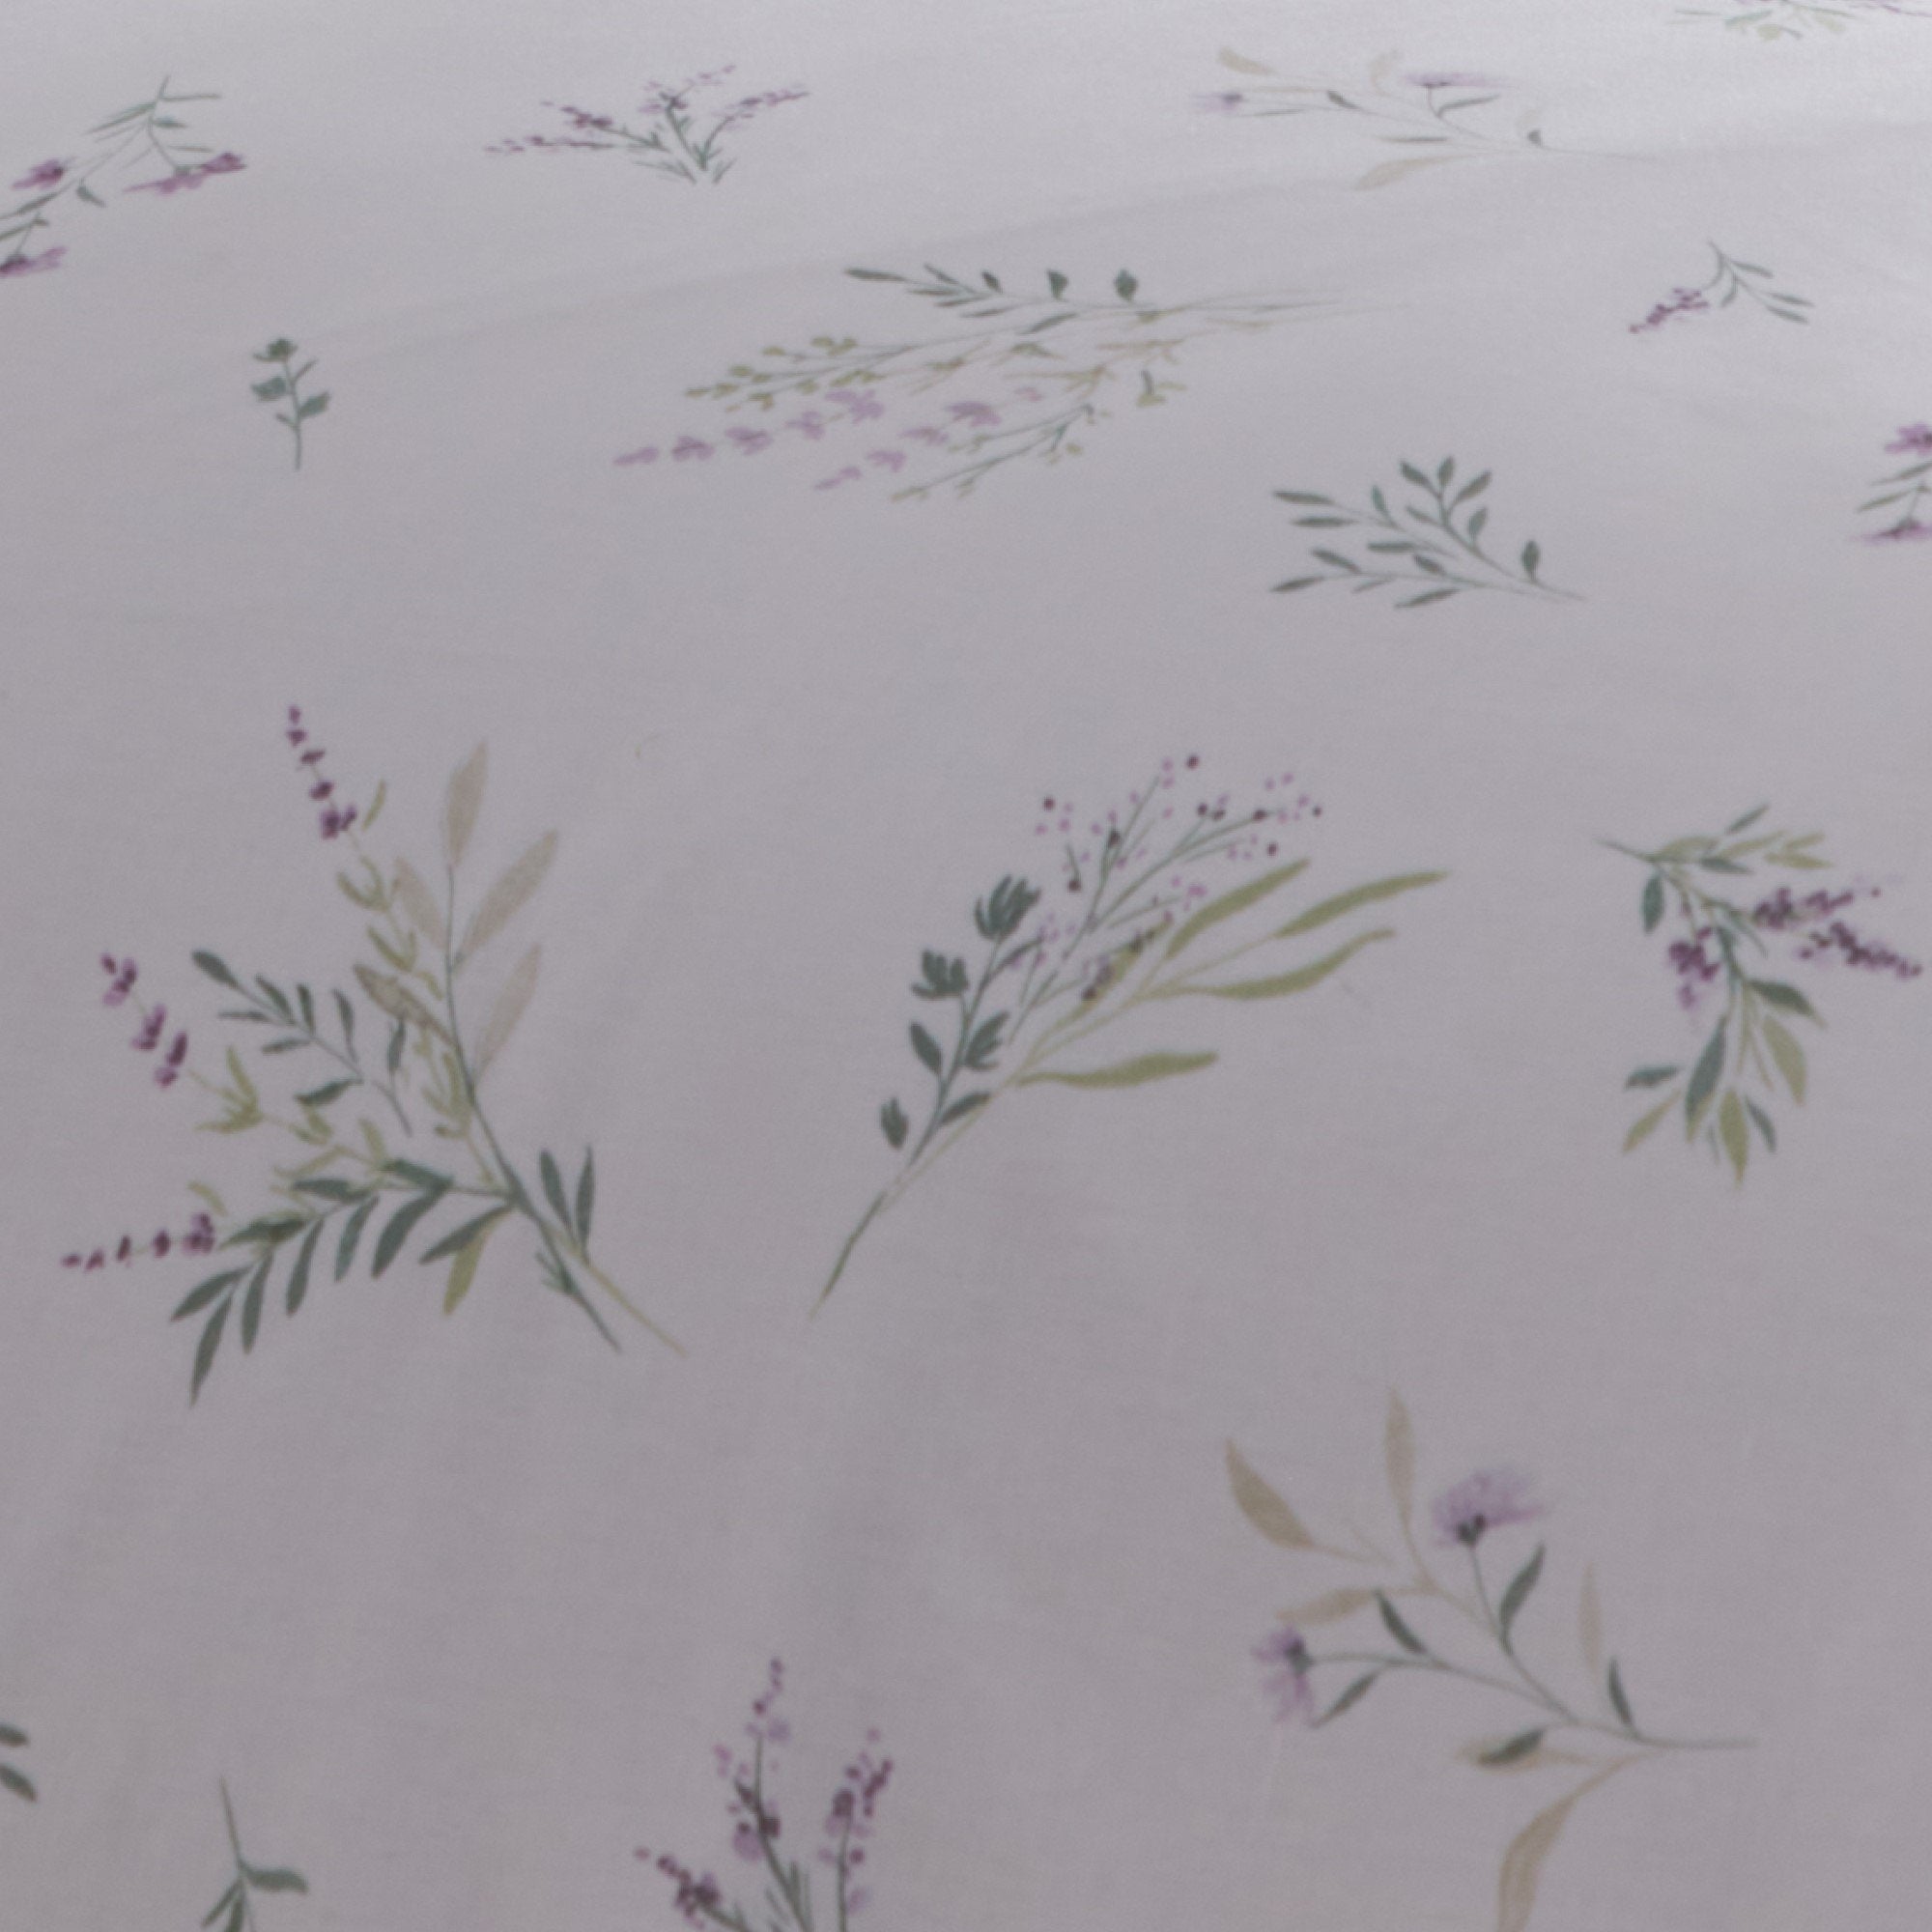 28cm Fitted Bed Sheet Set Chloe by Dreams & Drapes Decorative in Lilac